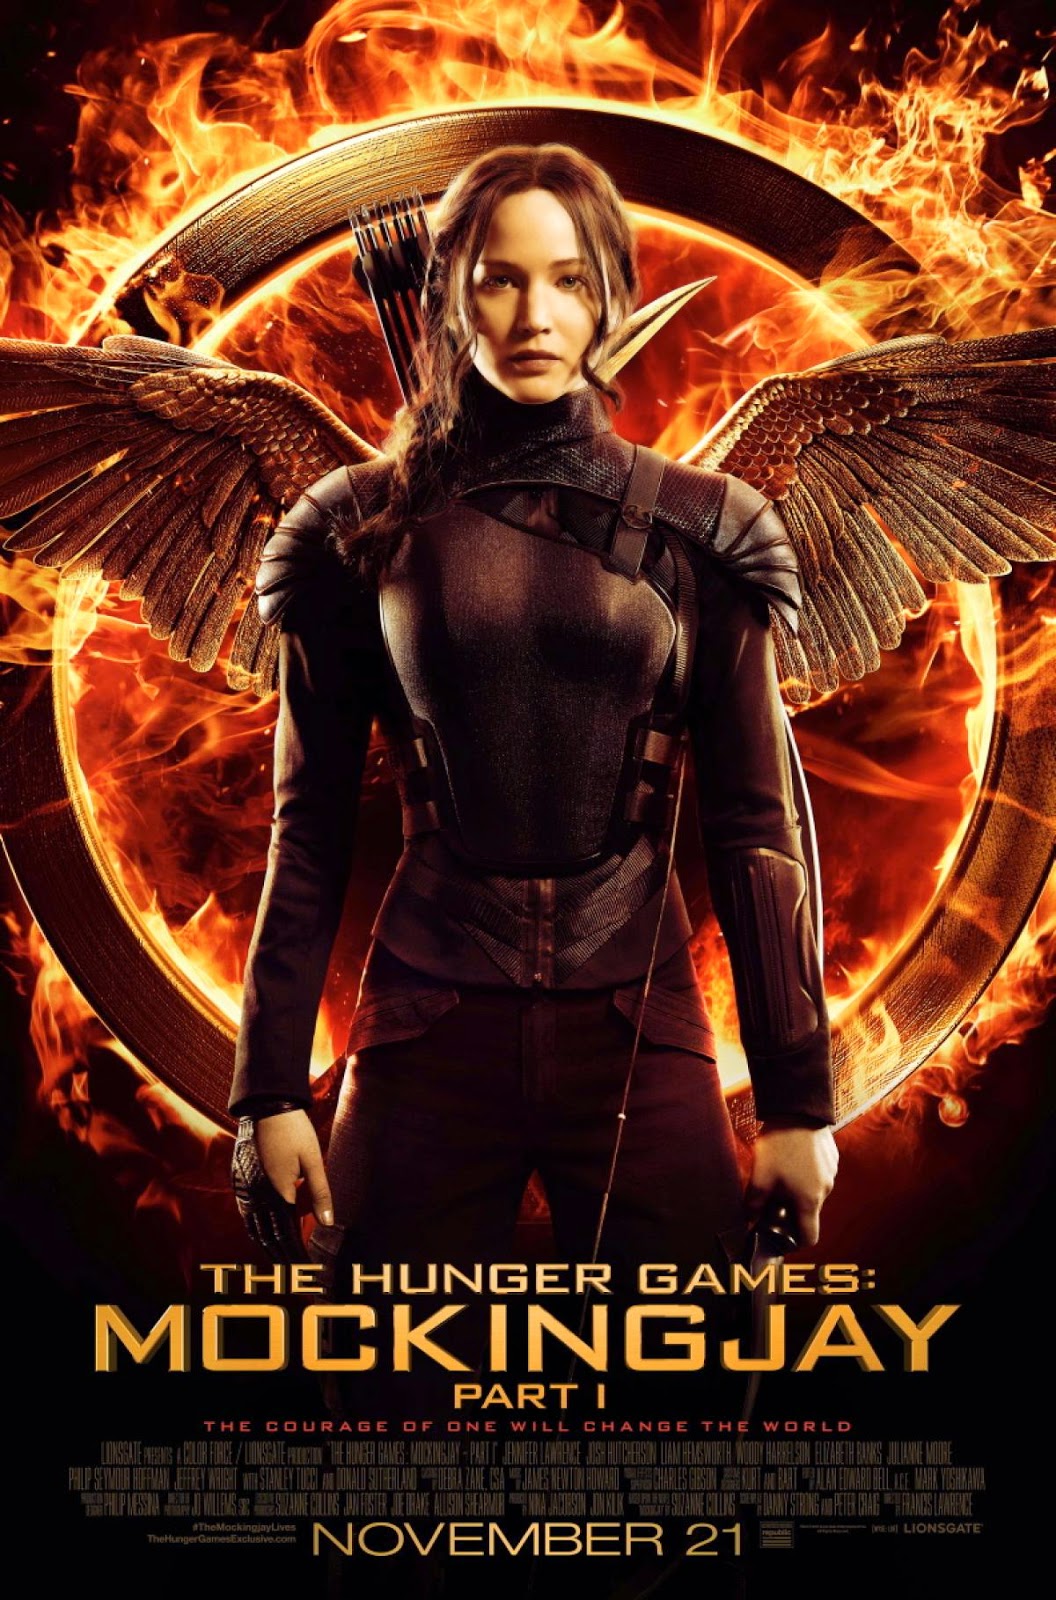 The Hunger Games: Mockingjay: Part 1 - Movie Poster